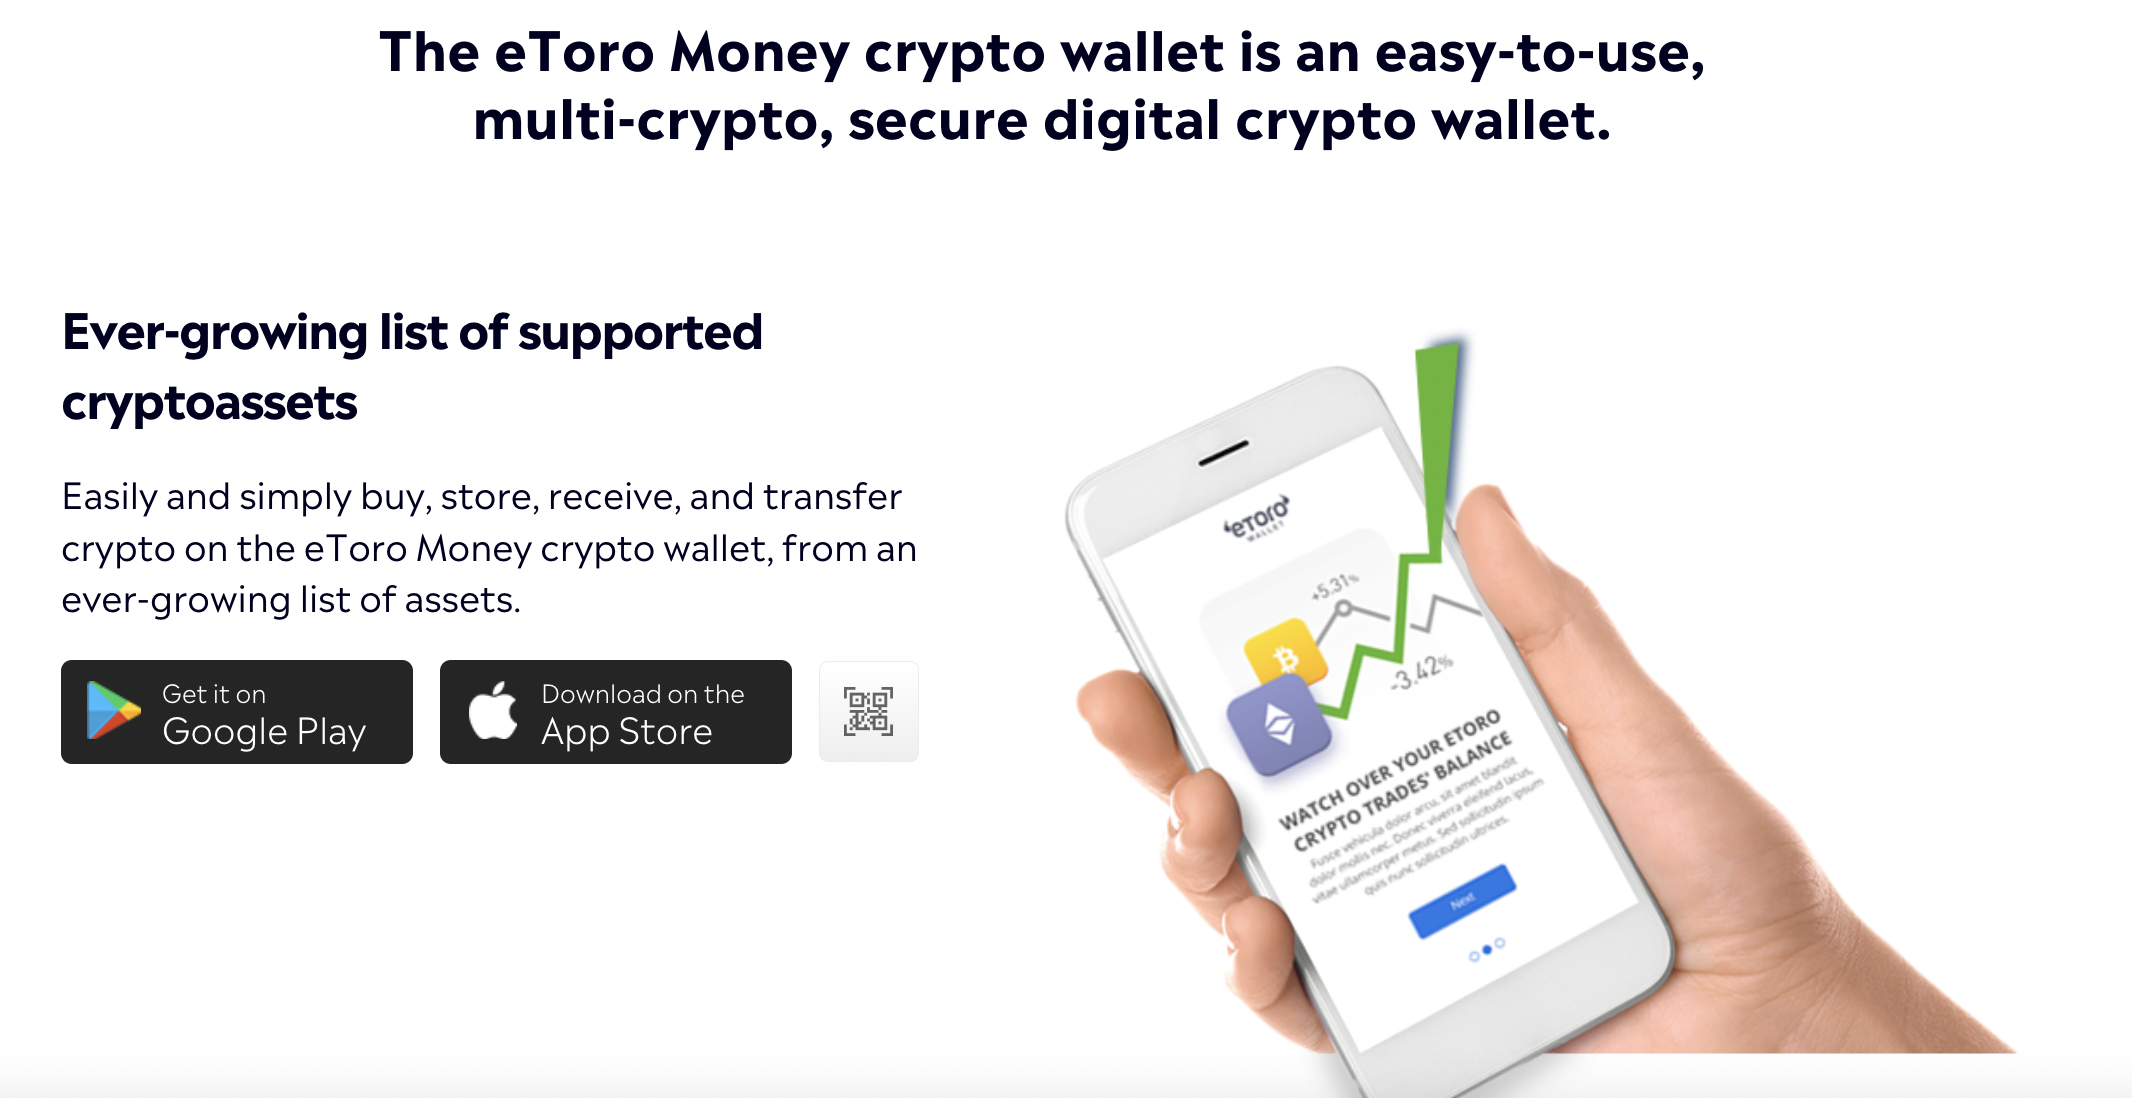 Best Multi-Currency Crypto Wallets, Multiwallets Review